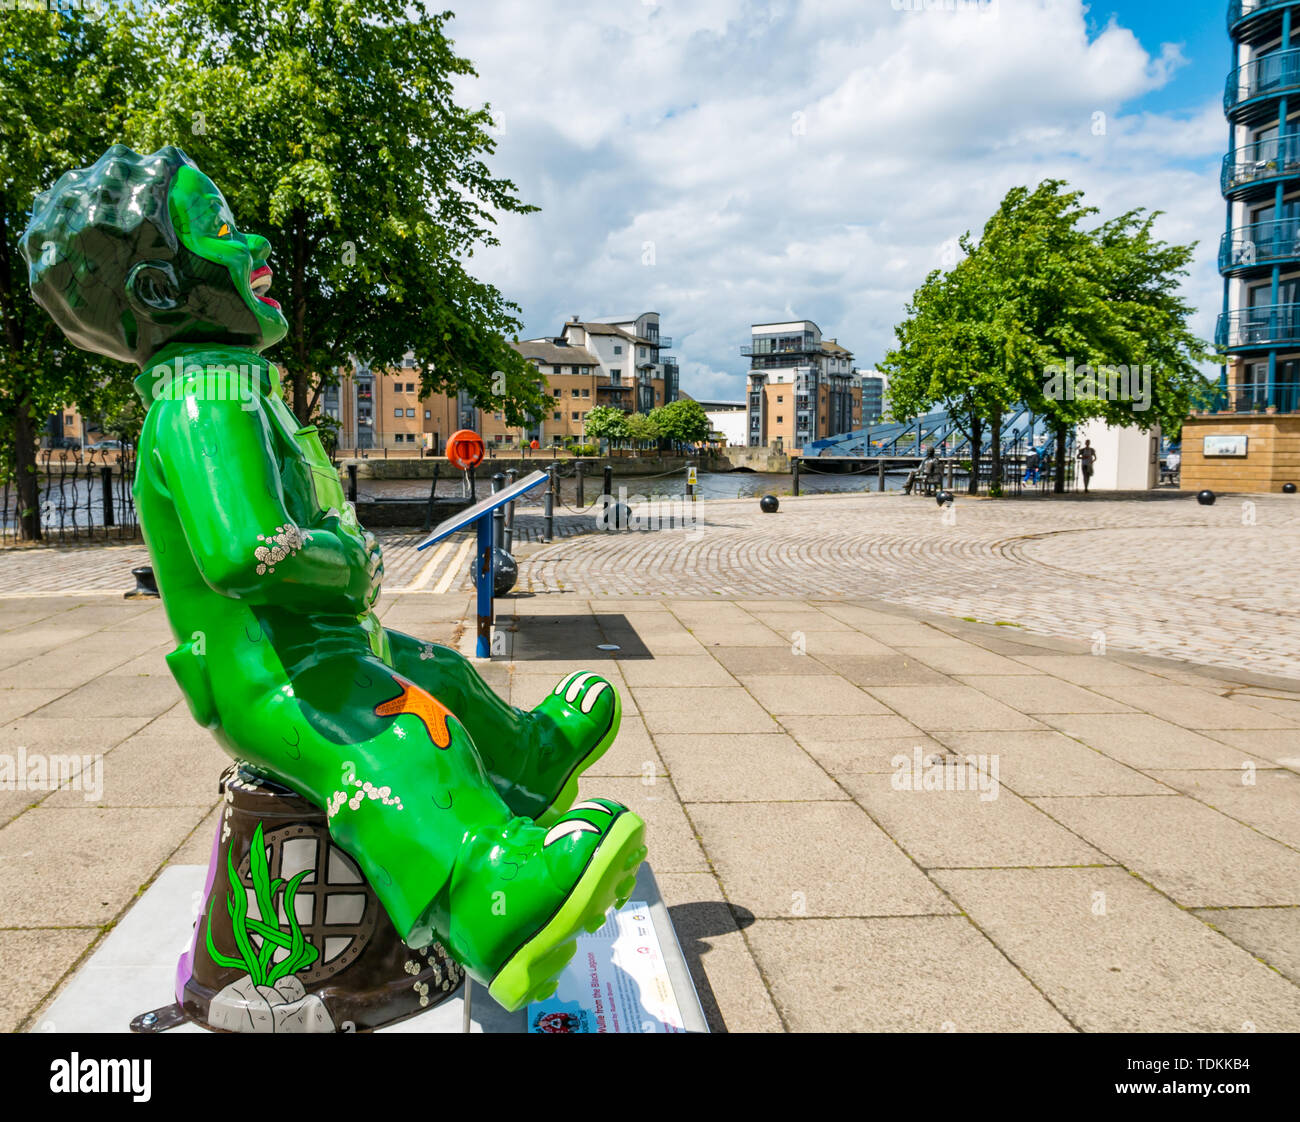 Leith, Edinburgh, Scotland, United Kingdom, 17 June 2019. Oor Wullie's Big Bucket Trail: An art trail of 200 Oor Wullie sculptures appear in Scottish cities in a mass arts event that lasts until August 30th. Oor Wullie is an iconic Scottish cartoon character. The sculptures will be auctioned to raise money for charities There are 5 in the Leith area, and 60 in Edinburgh altogether. Oor Wullie sculpture  by Ruairidh Brunton Stock Photo